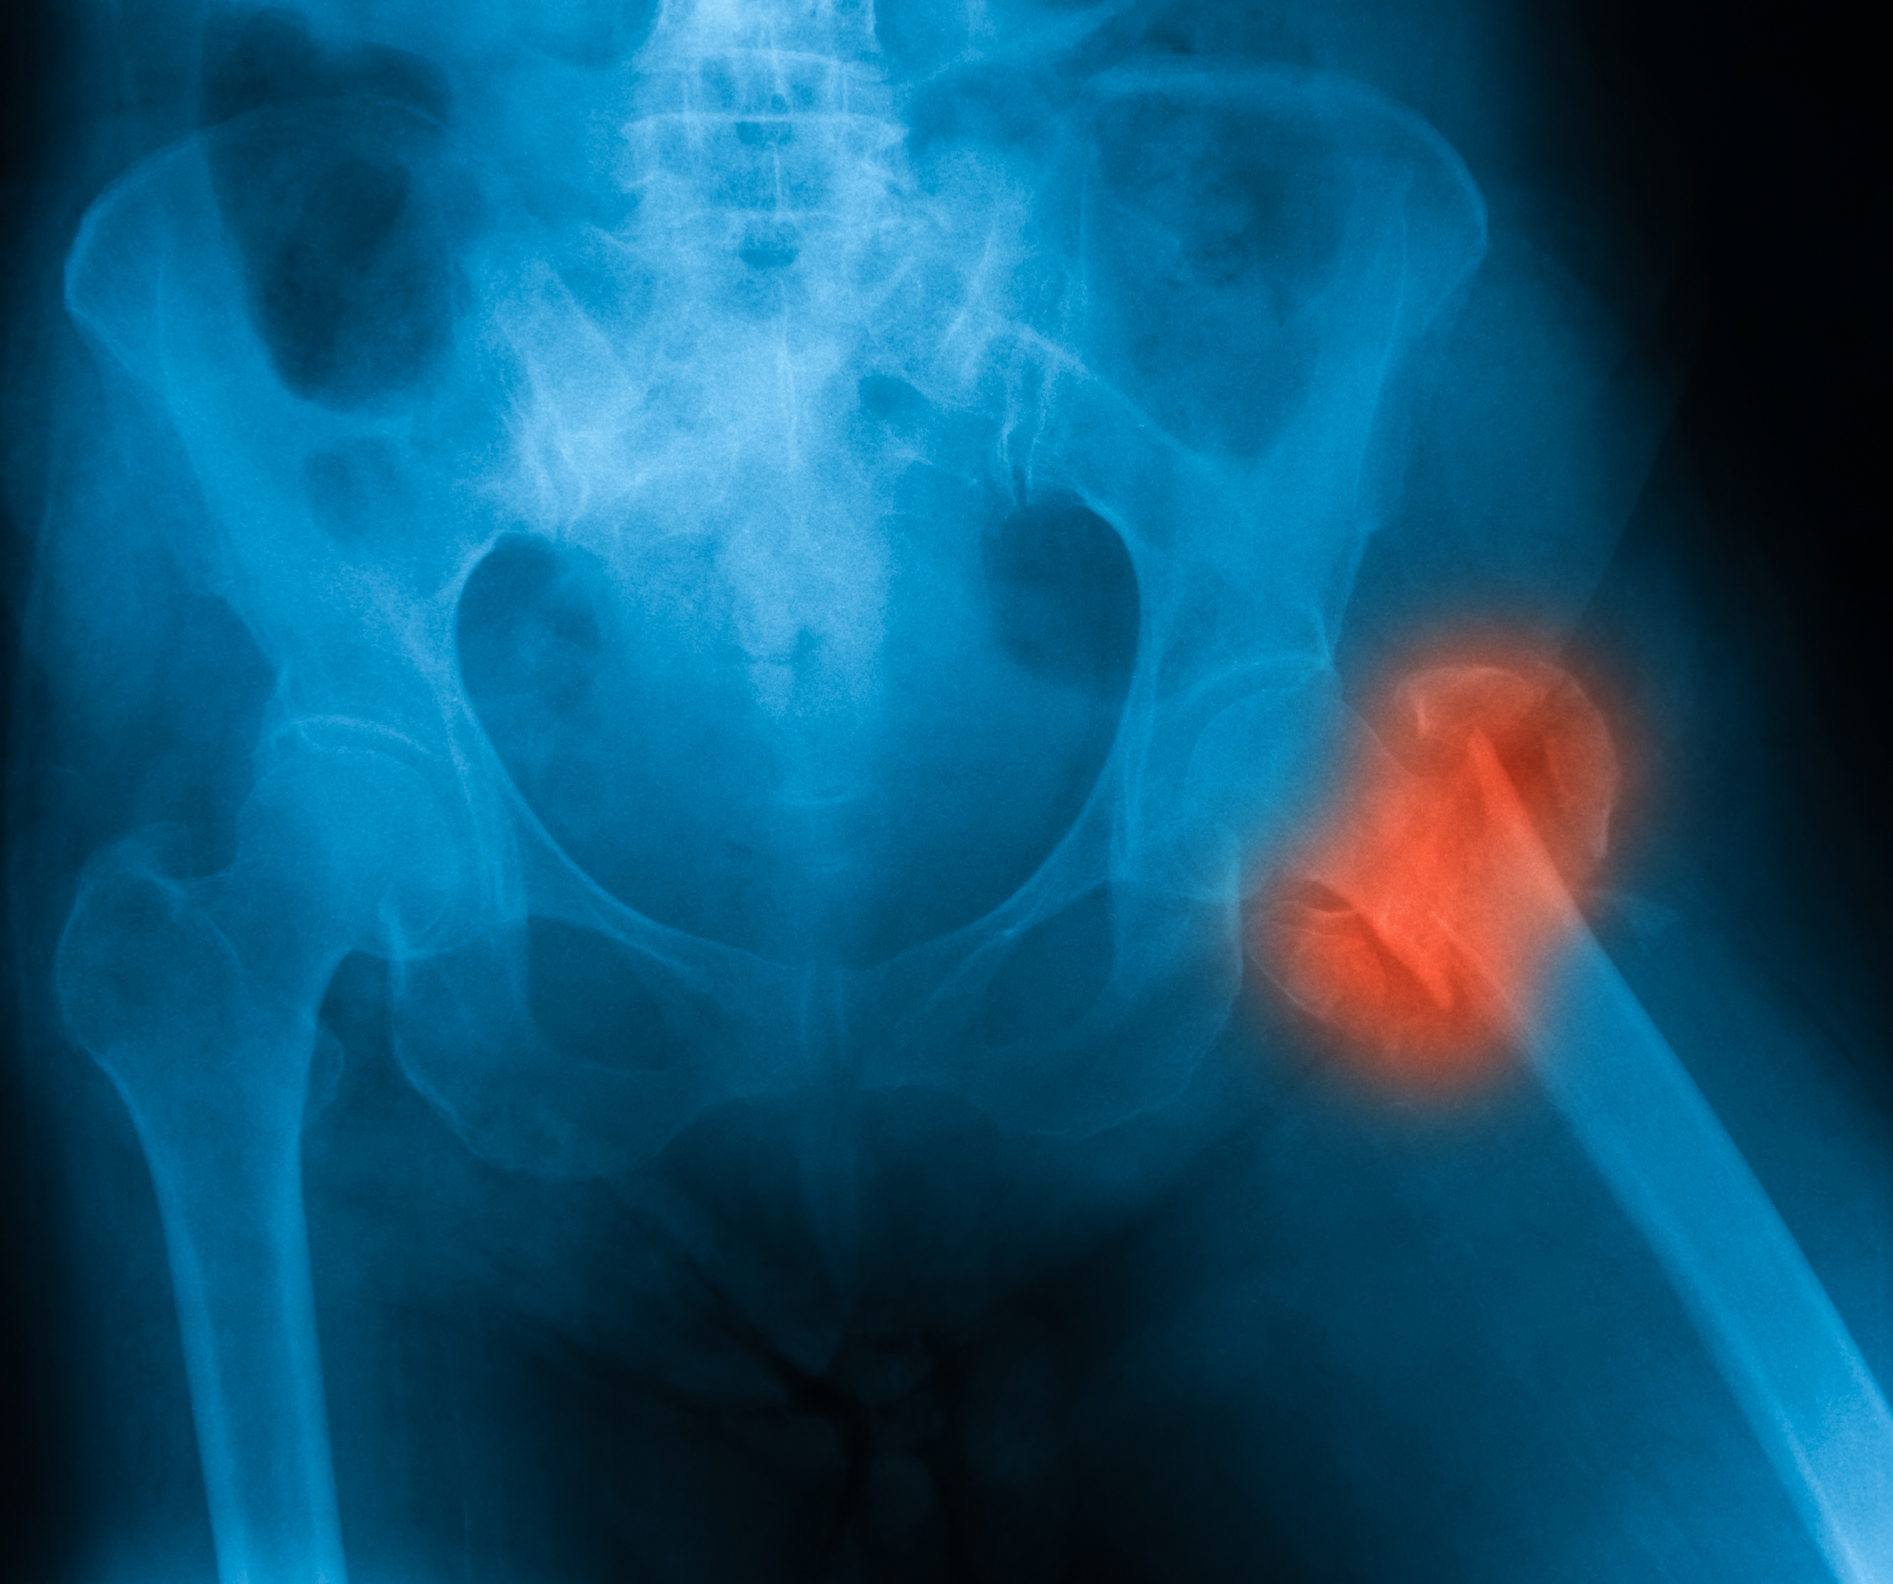 Osteoporosis risk increases in s...